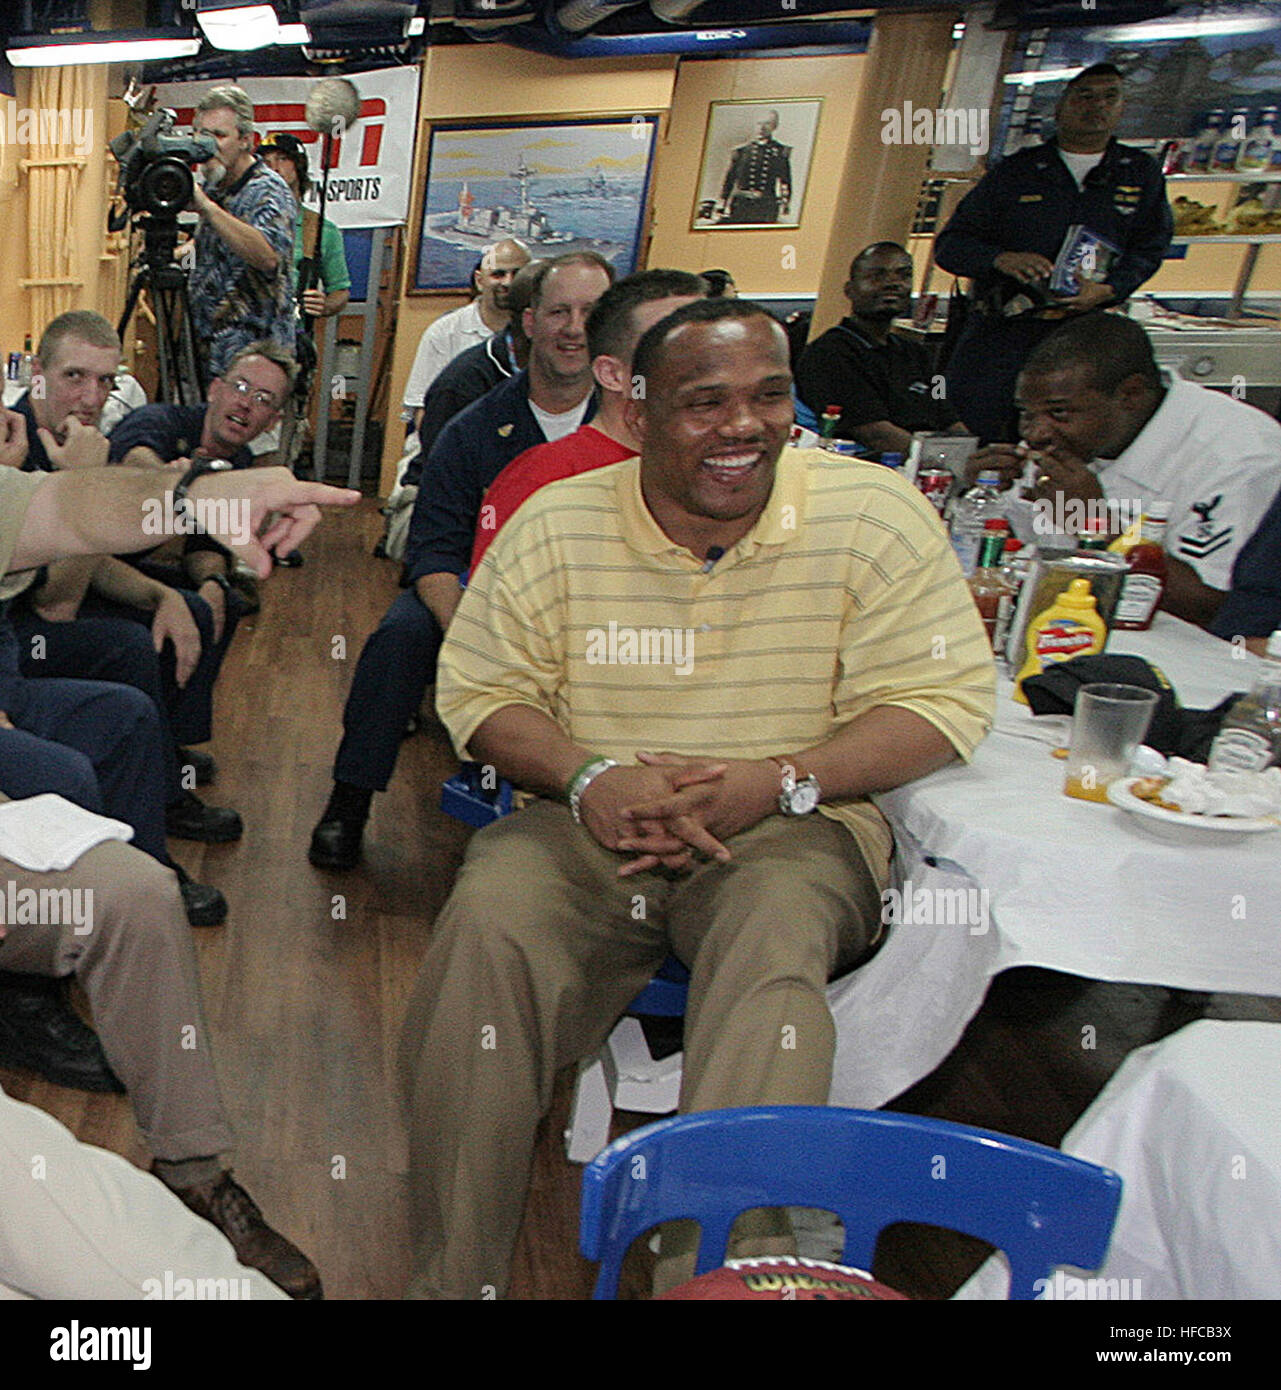 050206-N-3228G-020 Pearl Harbor, Hawaii (Feb. 6, 2005) - ESPN commentators and former National Football League (NFL) players Mike Golic and Mark Schlereth and Green Bay Packer fullback William Henderson and Sailors watch the 2005 Super Bowl in the galley aboard USS Russell (DDG 59). Golic, Schlereth and Henderson were invited for a visit aboard Russell to watch the Super Bowl with the shipÕs crew, have lunch and tour the ship. U.S. Navy photo by PhotographerÕs Mate 1st Class William R. Goodwin (RELEASED) Mark Schlereth and William Henderson and Mike Golic edit Stock Photo